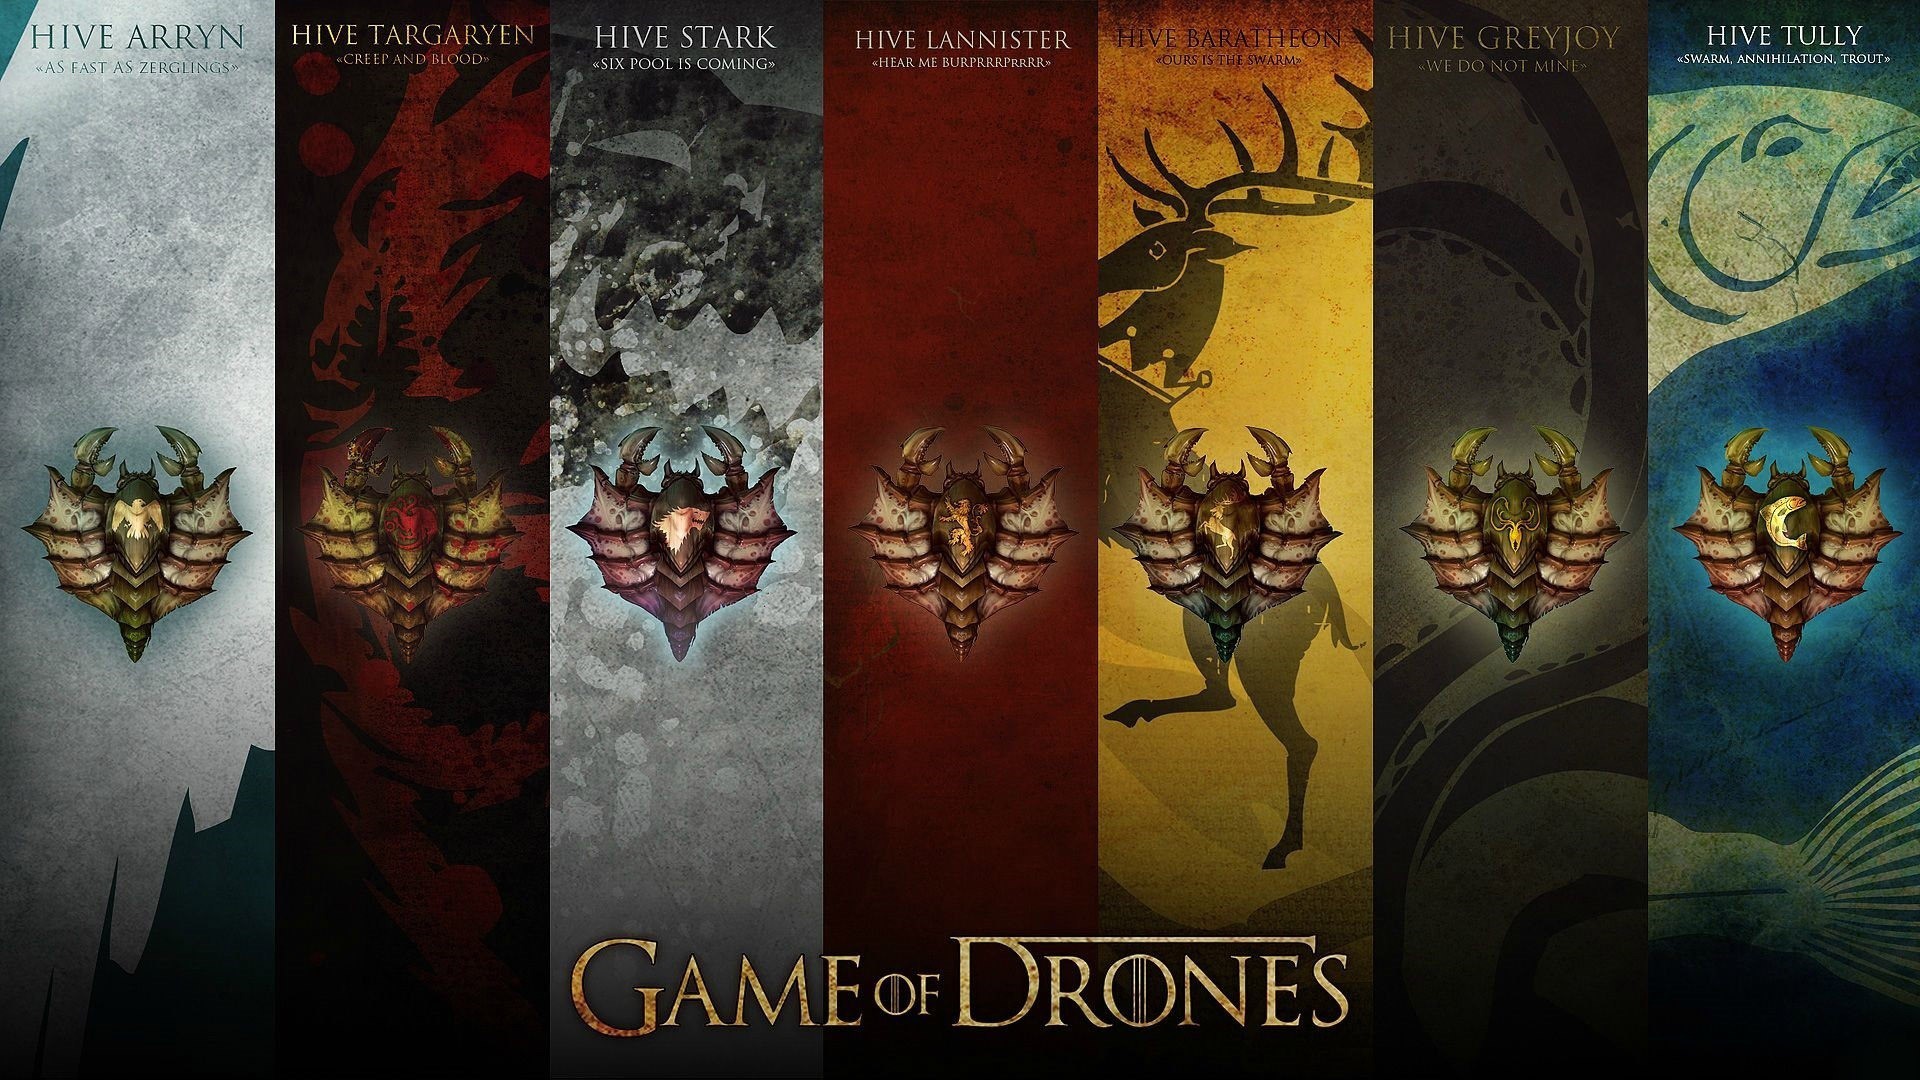 1920x1080  Game of Drones HD Wallpaper | Game Of Thrones Wallpapers